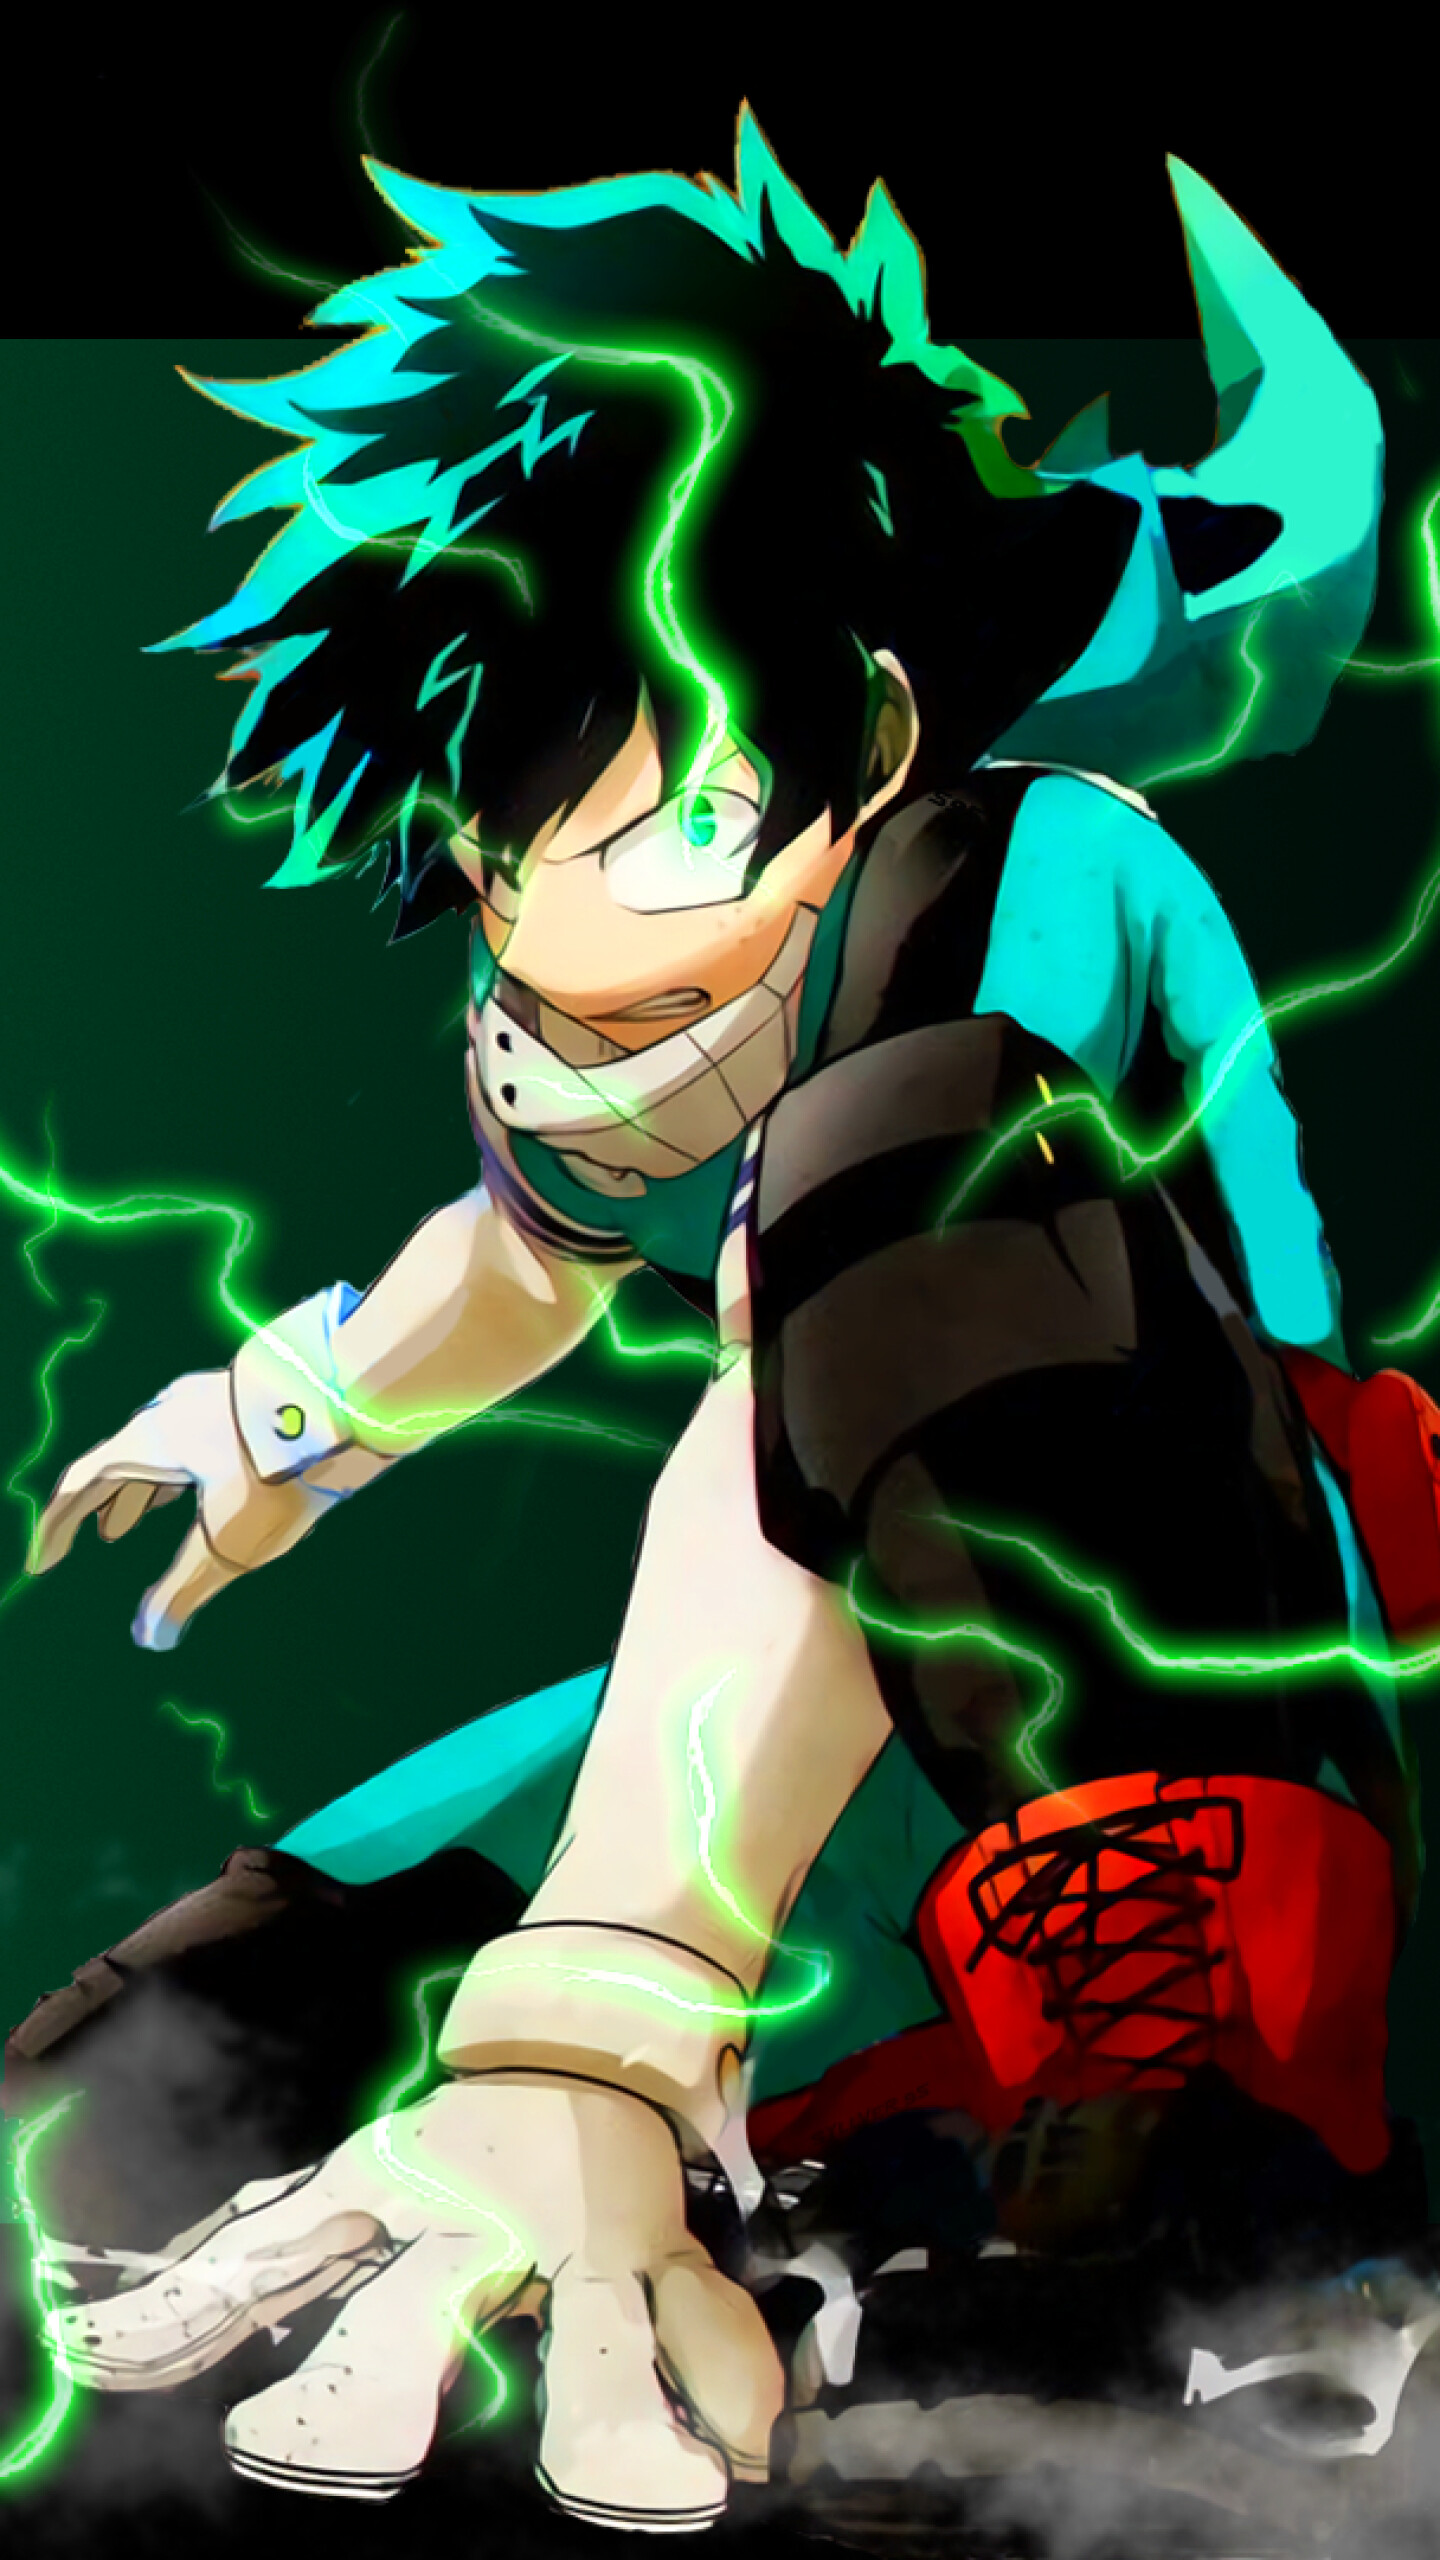 My Hero Academia: Deku, BNHA, A boy who was born without a Quirk but still dreams of becoming a superhero himself. 1440x2560 HD Wallpaper.